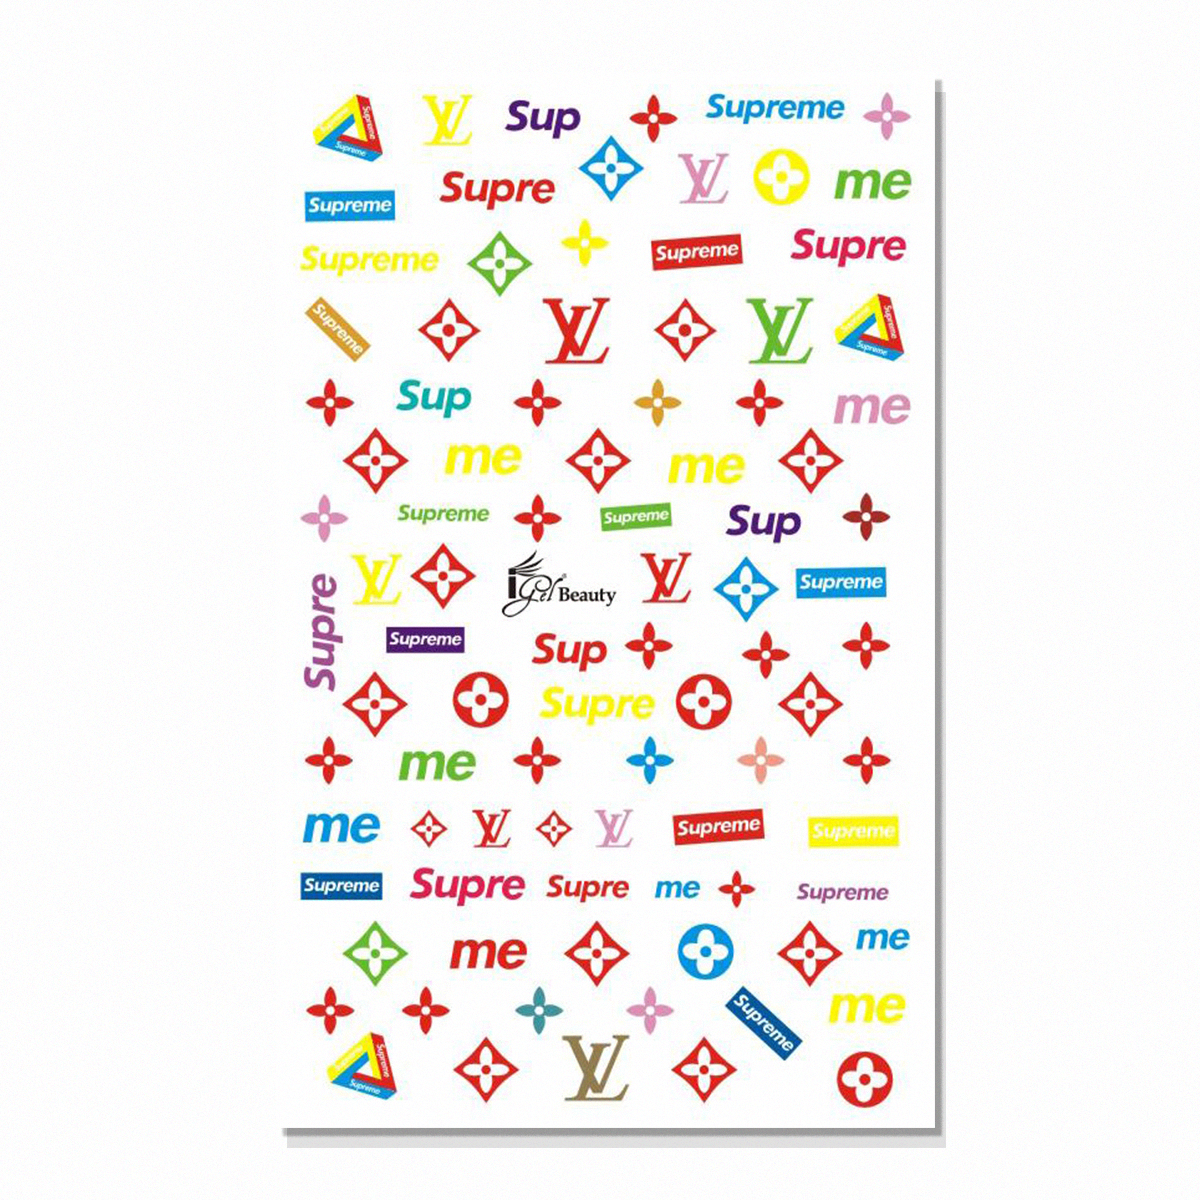 louis vuitton stickers for nails